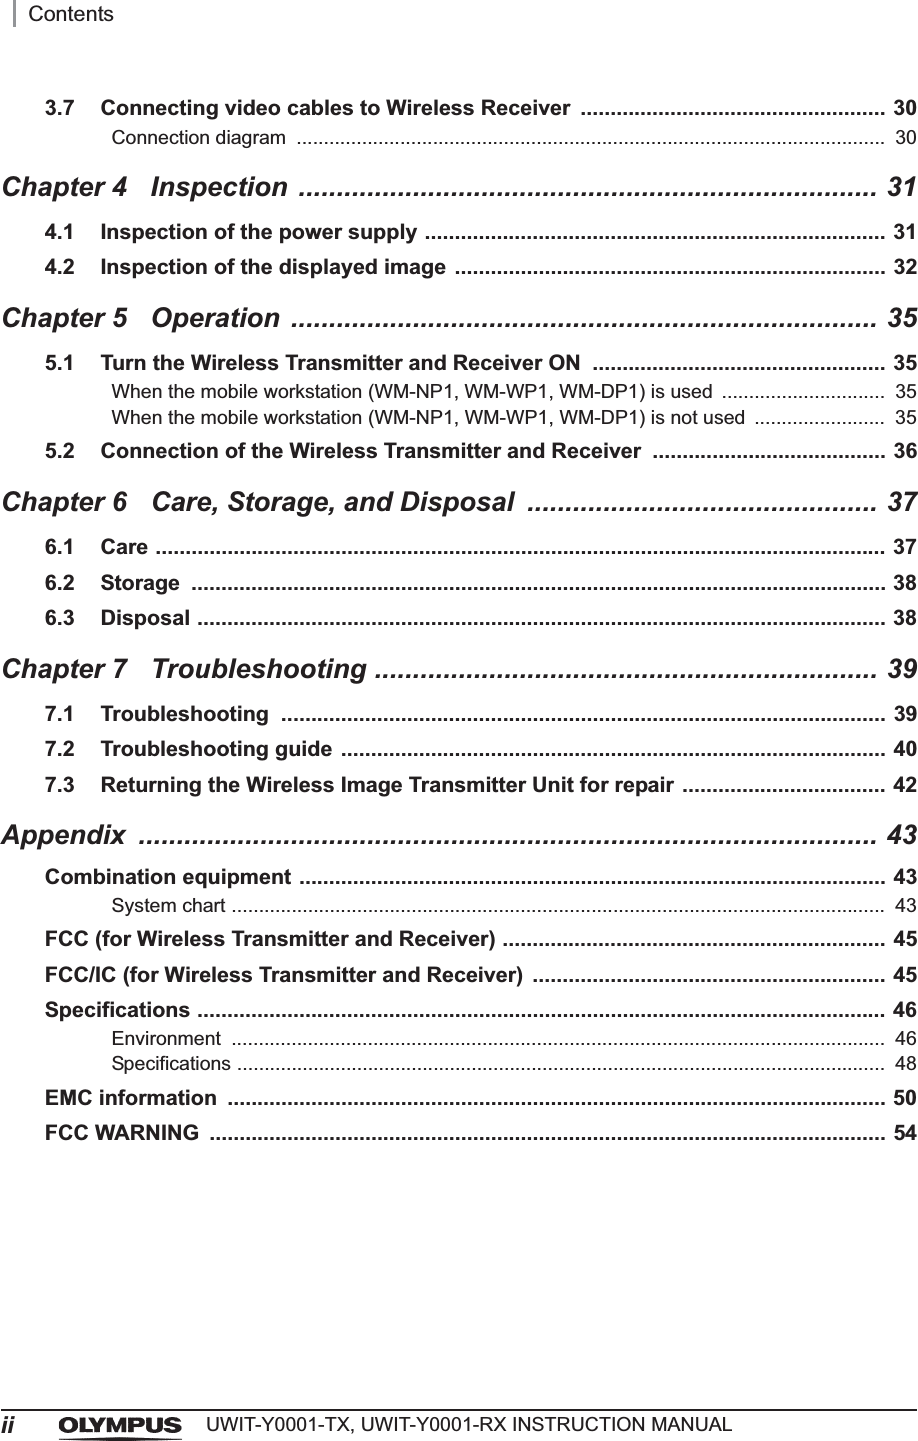 iiContentsUWIT-Y0001-TX, UWIT-Y0001-RX INSTRUCTION MANUAL3.7 Connecting video cables to Wireless Receiver  ................................................... 30Connection diagram  ............................................................................................................  30Chapter 4 Inspection ............................................................................ 314.1 Inspection of the power supply ............................................................................. 314.2 Inspection of the displayed image ........................................................................ 32Chapter 5 Operation ............................................................................. 355.1 Turn the Wireless Transmitter and Receiver ON  ................................................. 35When the mobile workstation (WM-NP1, WM-WP1, WM-DP1) is used ..............................  35When the mobile workstation (WM-NP1, WM-WP1, WM-DP1) is not used  ........................  355.2 Connection of the Wireless Transmitter and Receiver  ....................................... 36Chapter 6 Care, Storage, and Disposal  .............................................. 376.1 Care .......................................................................................................................... 376.2 Storage .................................................................................................................... 386.3 Disposal ................................................................................................................... 38Chapter 7 Troubleshooting .................................................................. 397.1 Troubleshooting ..................................................................................................... 397.2 Troubleshooting guide ........................................................................................... 407.3 Returning the Wireless Image Transmitter Unit for repair .................................. 42Appendix ................................................................................................. 43Combination equipment .................................................................................................. 43System chart ........................................................................................................................  43FCC (for Wireless Transmitter and Receiver) ................................................................ 45FCC/IC (for Wireless Transmitter and Receiver)  ........................................................... 45Specifications ................................................................................................................... 46Environment ........................................................................................................................  46Specifications .......................................................................................................................  48EMC information  .............................................................................................................. 50FCC WARNING  ................................................................................................................. 54